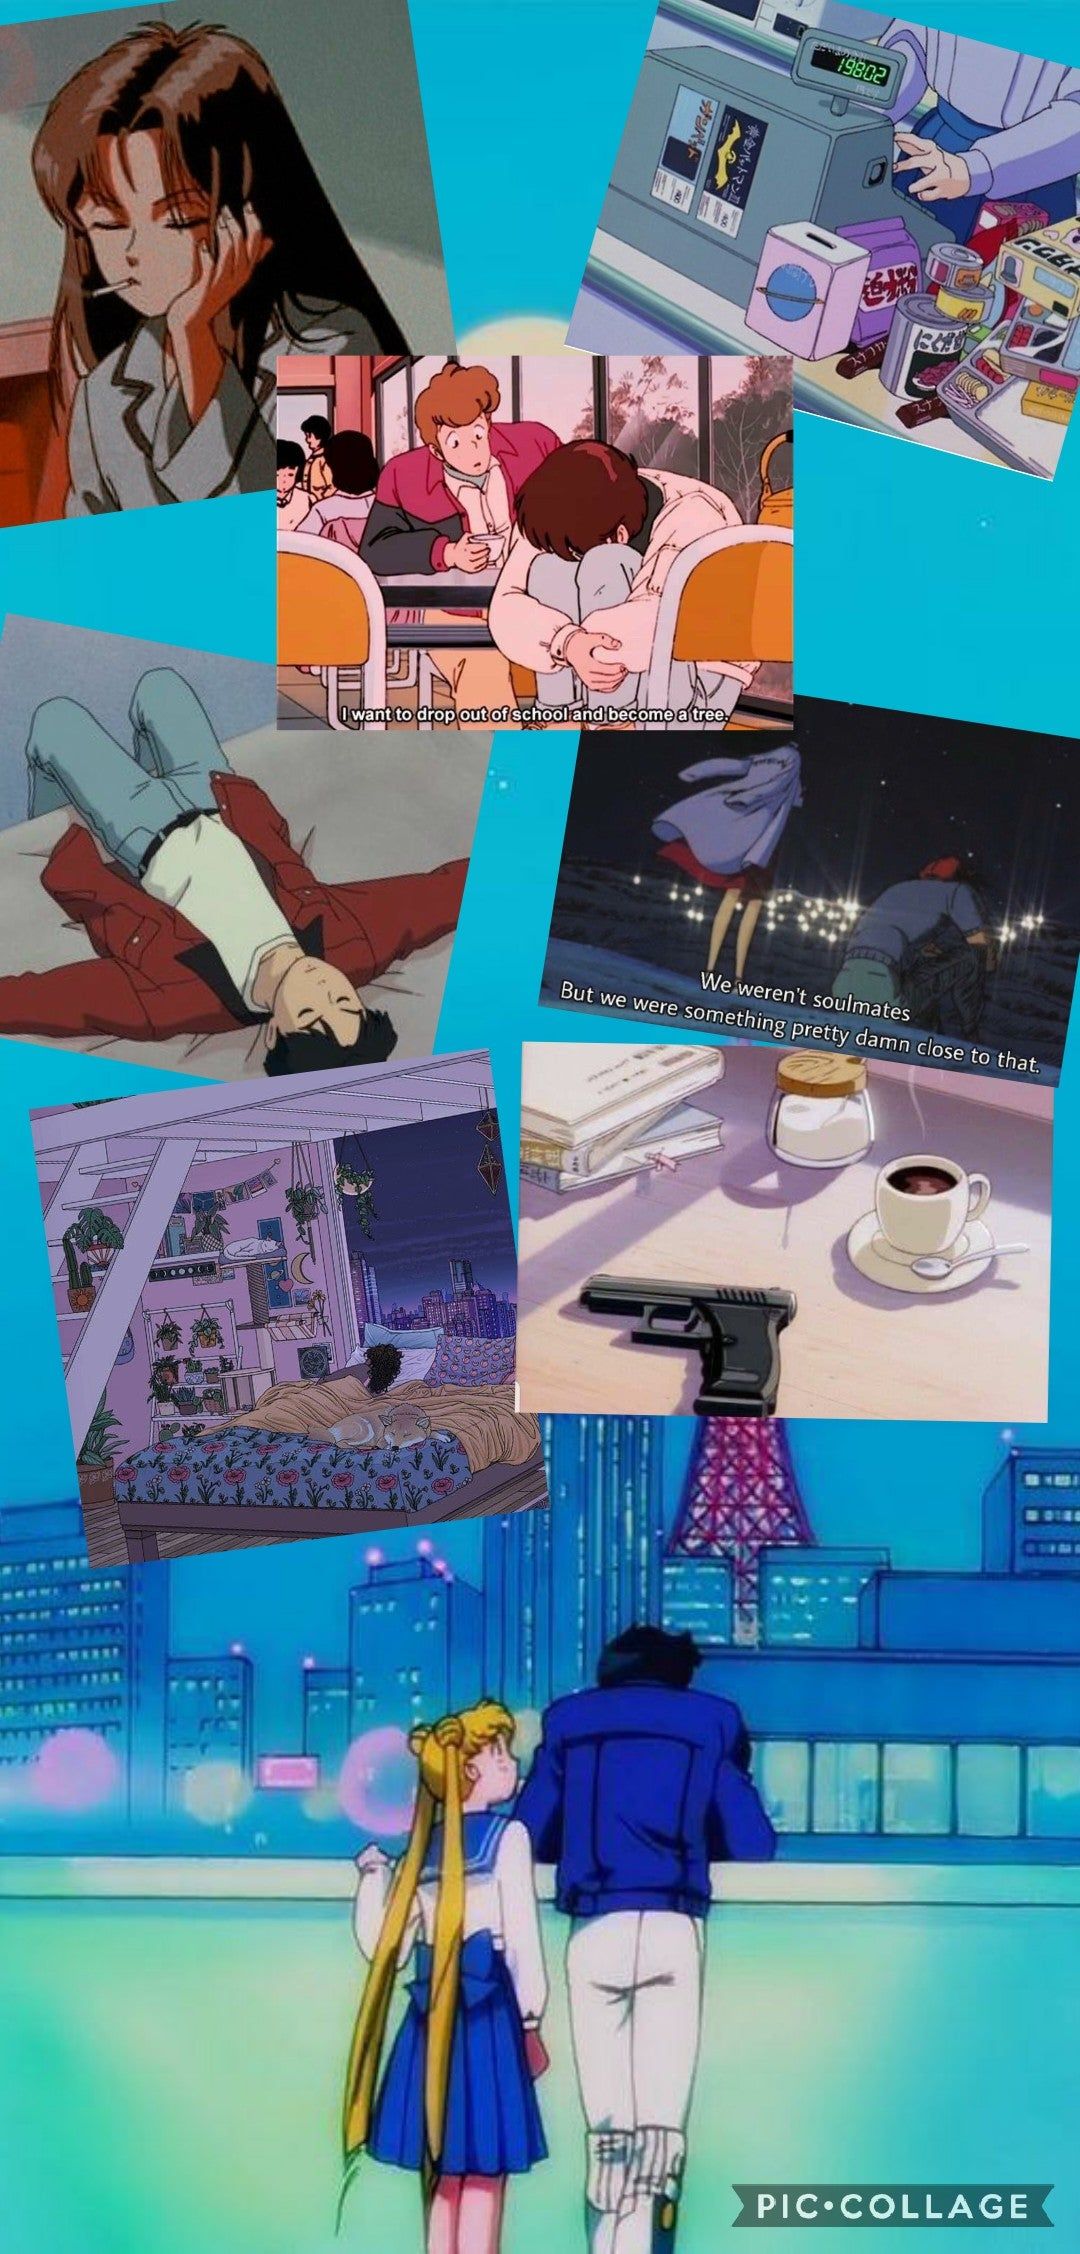 Made this collage of 90s anime in like 5 minutes on my phone to use as a wallpaper